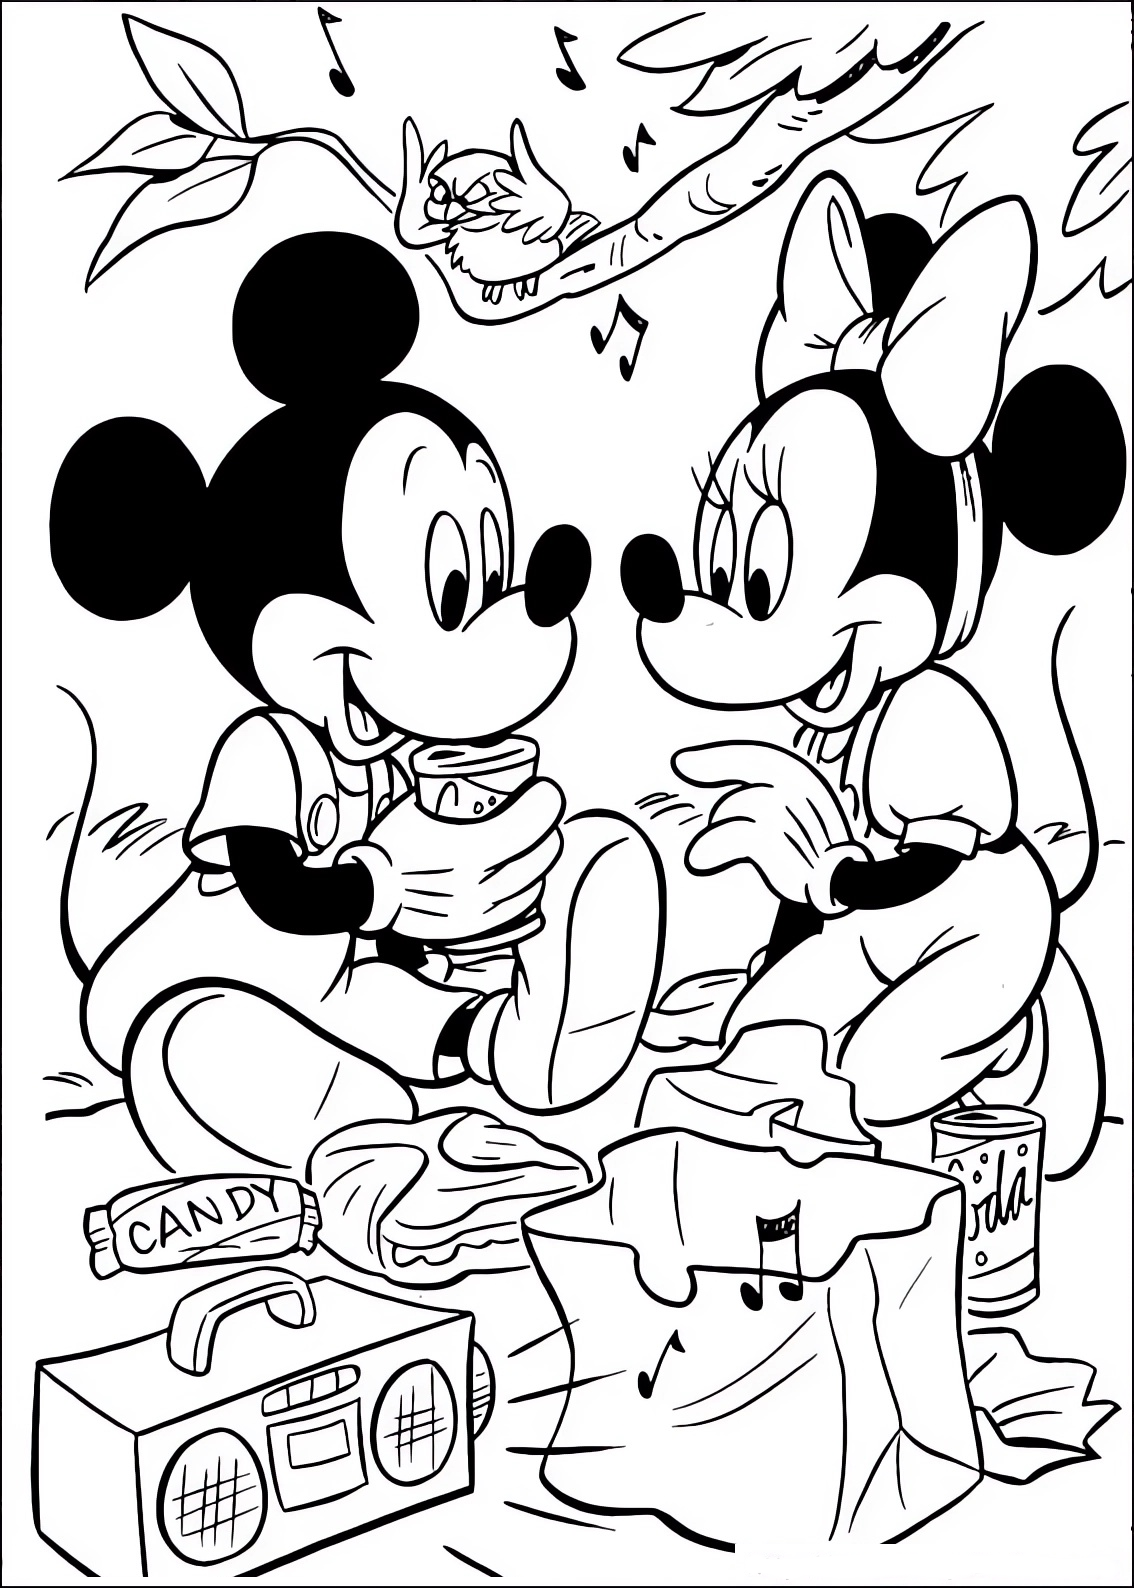 Coloring page of Minnie and Mickey Mouse having a picnic